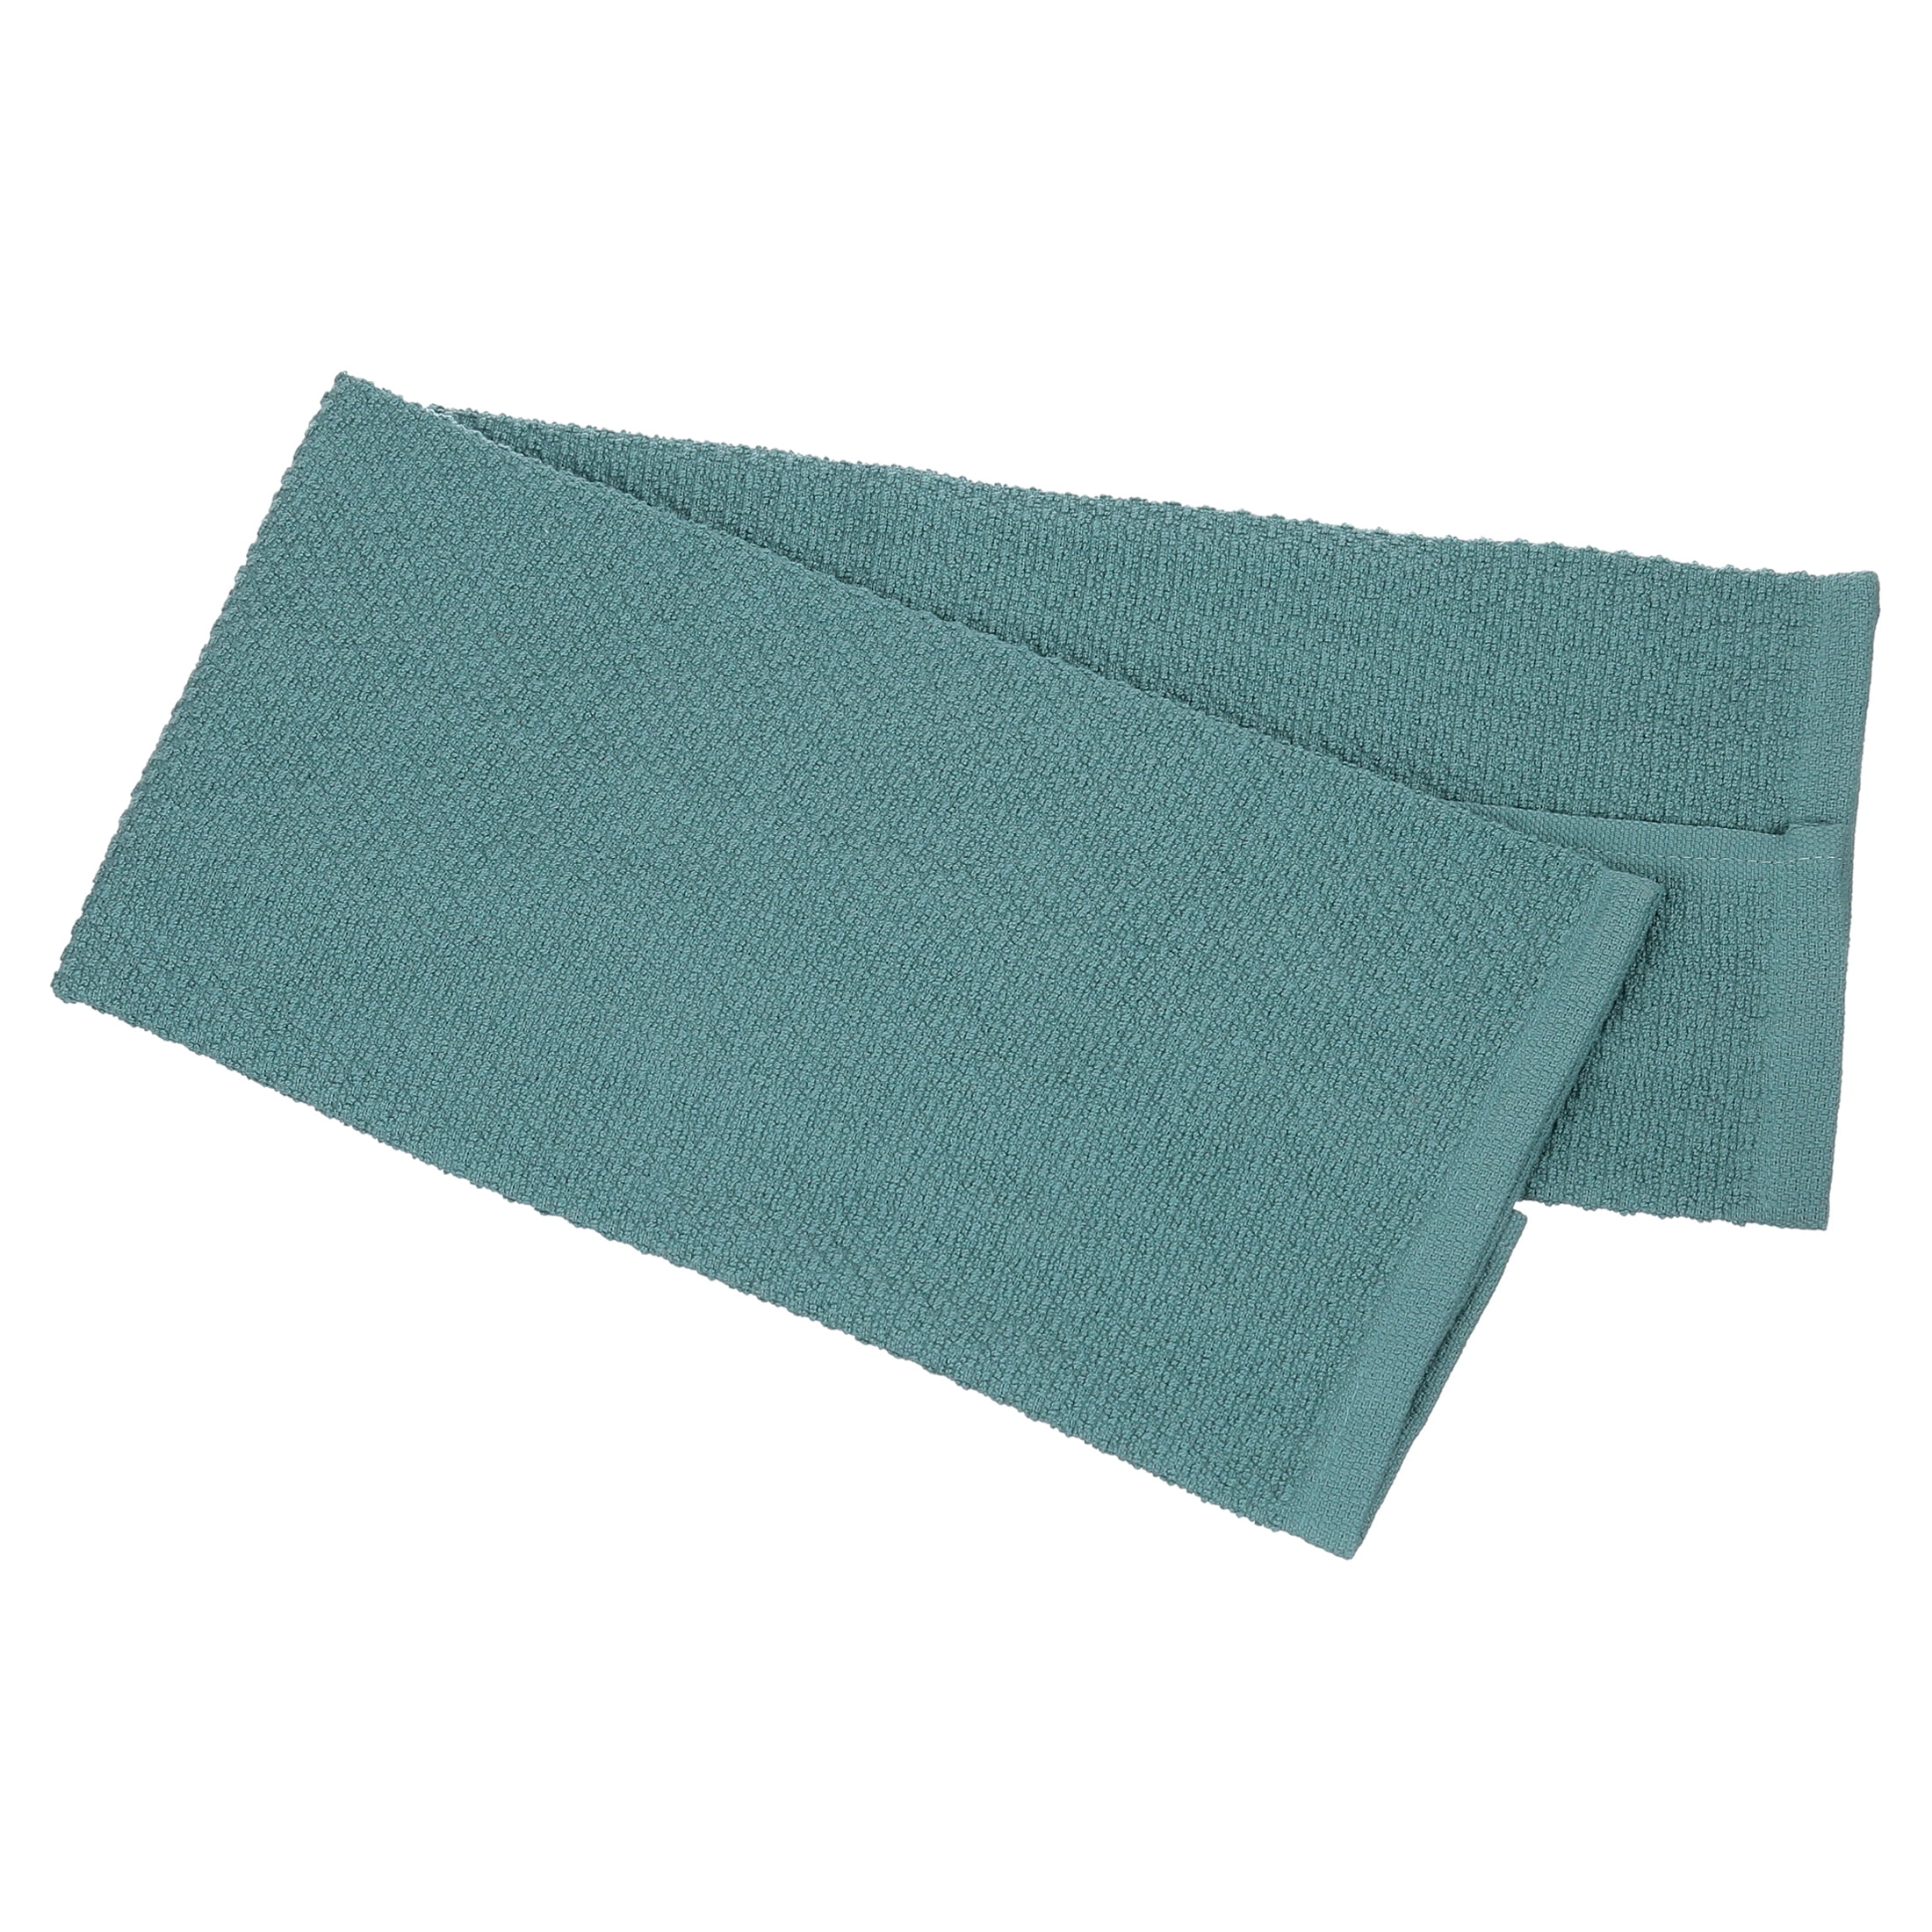 Sticky Toffee Cotton Terry Kitchen Dish Towel, Dark Green, 4 Pack, 28 in x 16 in